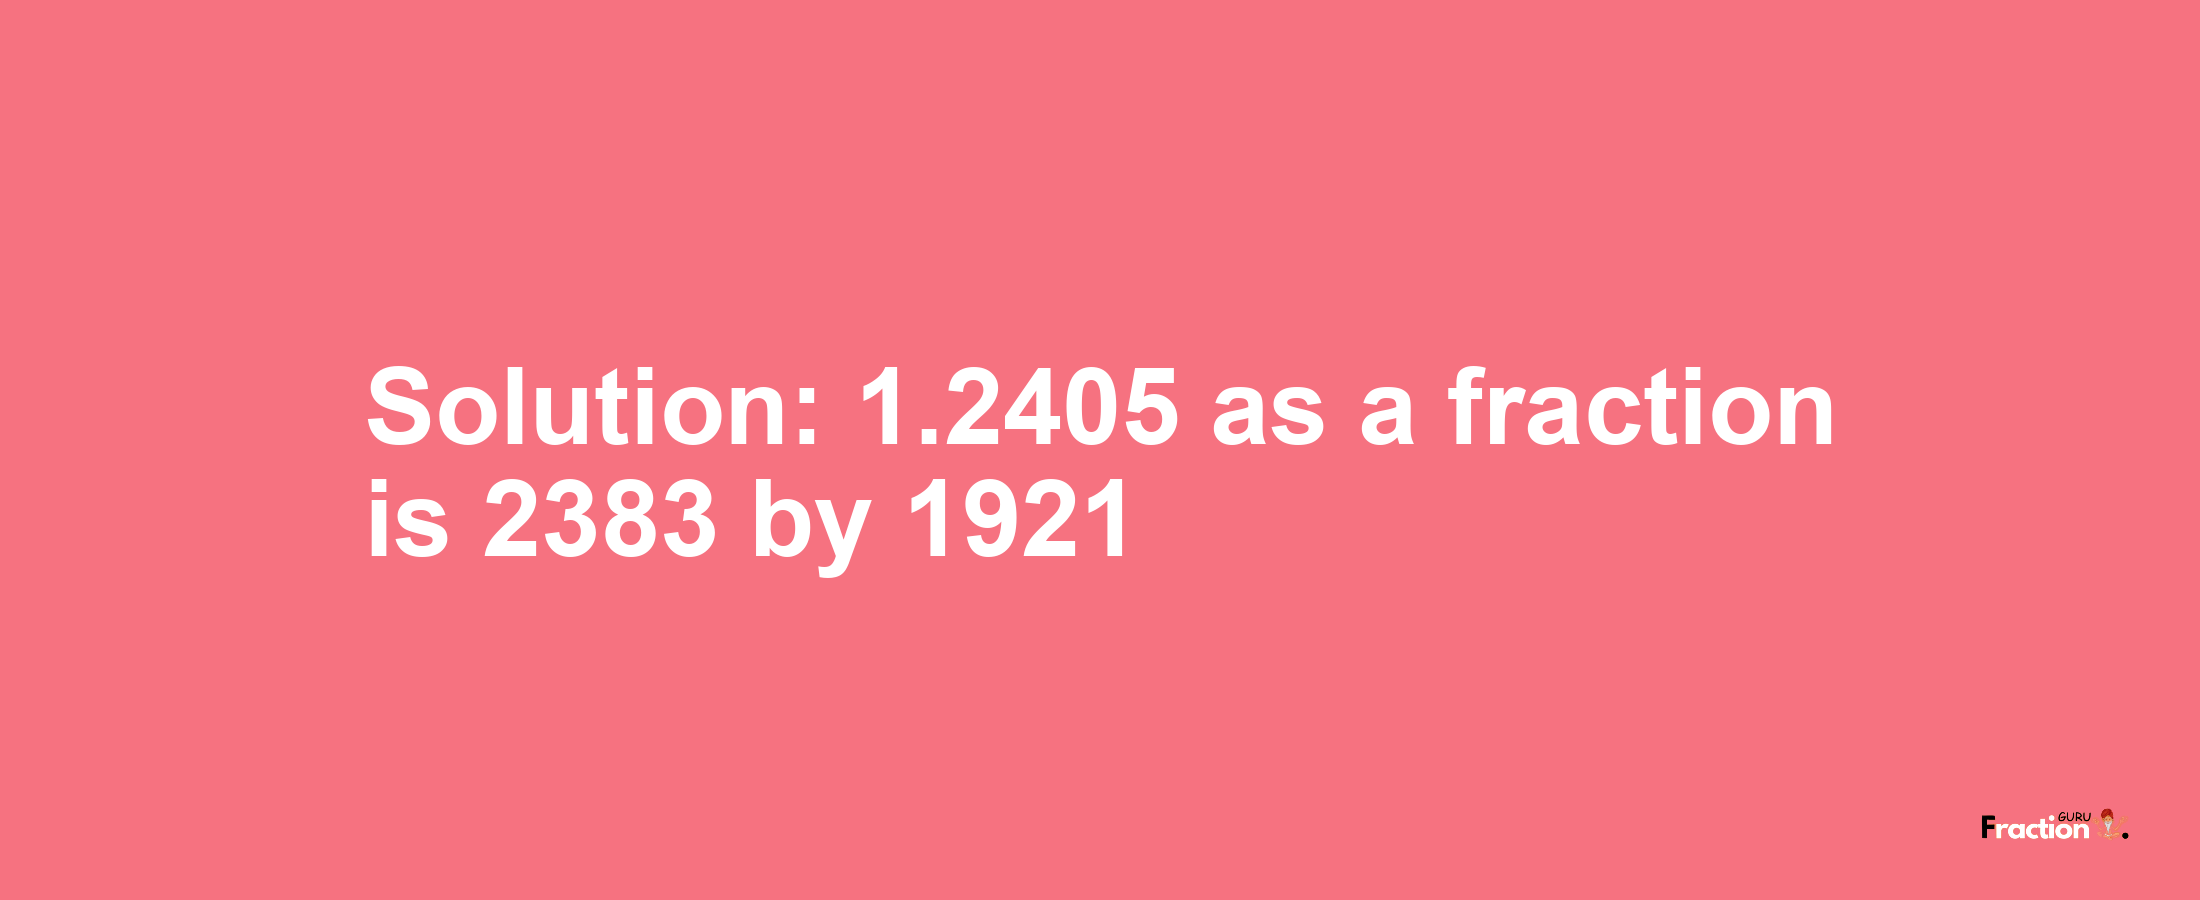 Solution:1.2405 as a fraction is 2383/1921